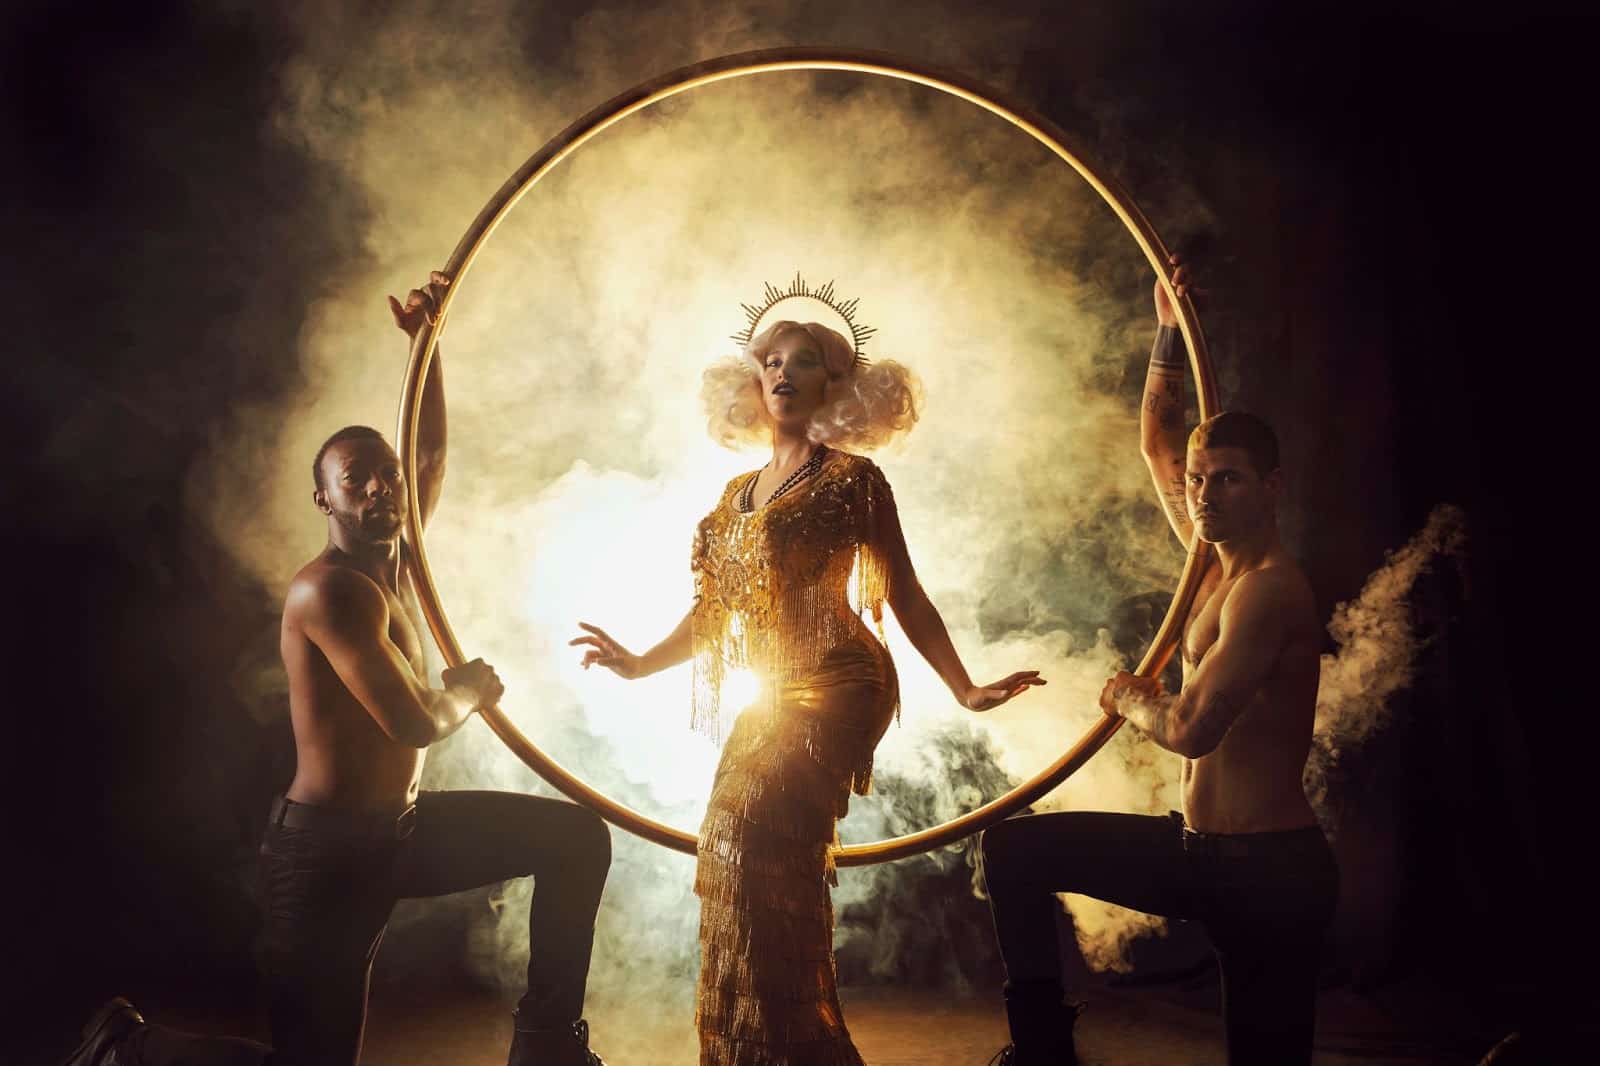 A dancer stands in the middle of a ring